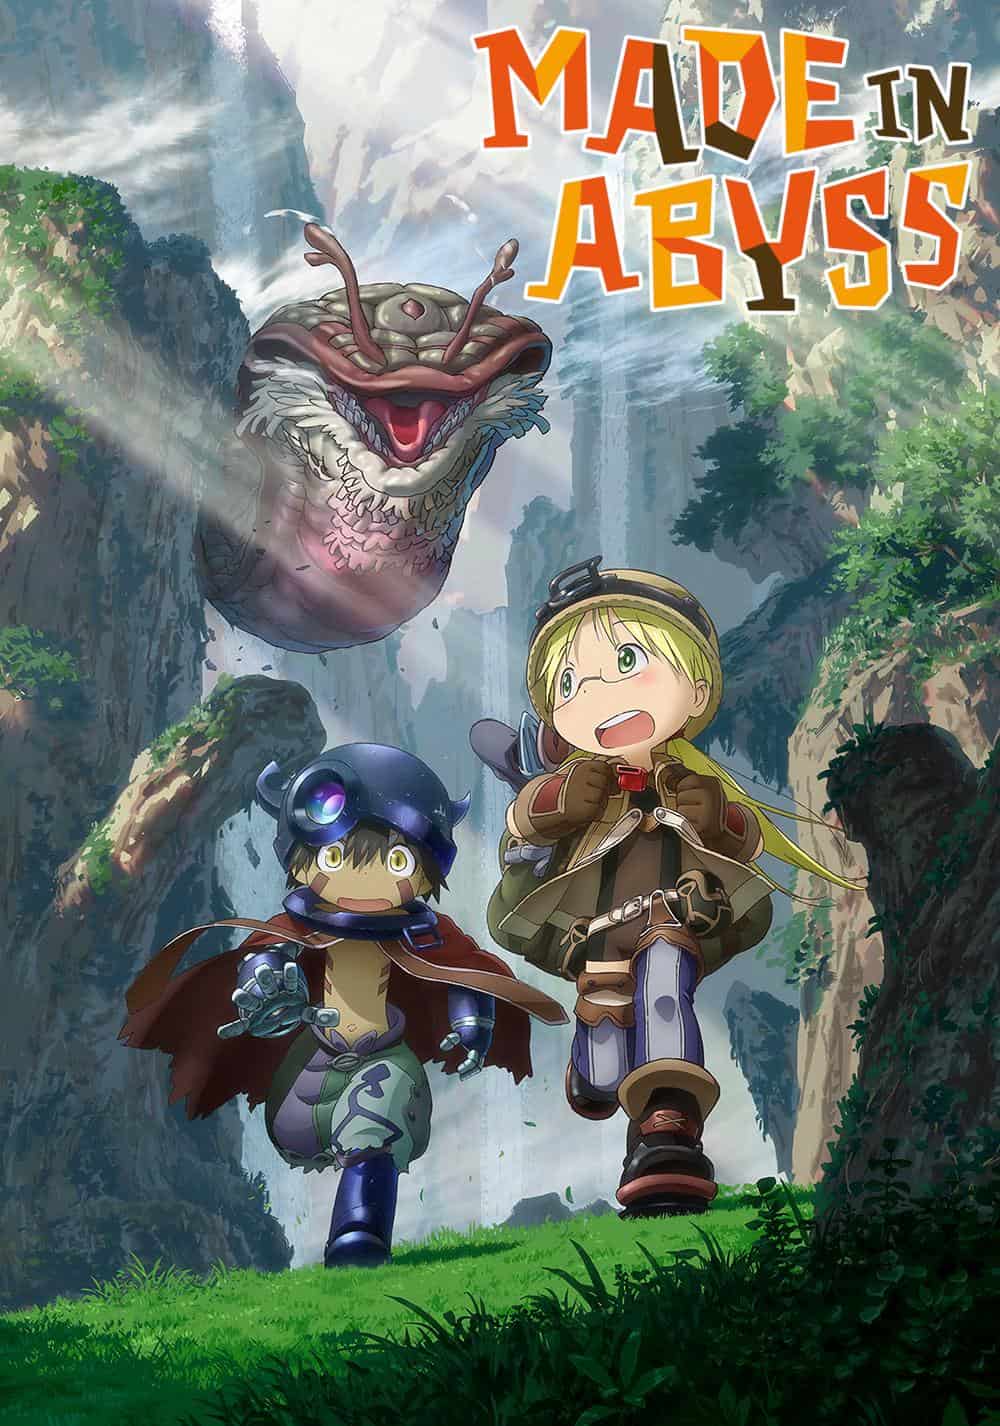 Made in Abyss hd poster